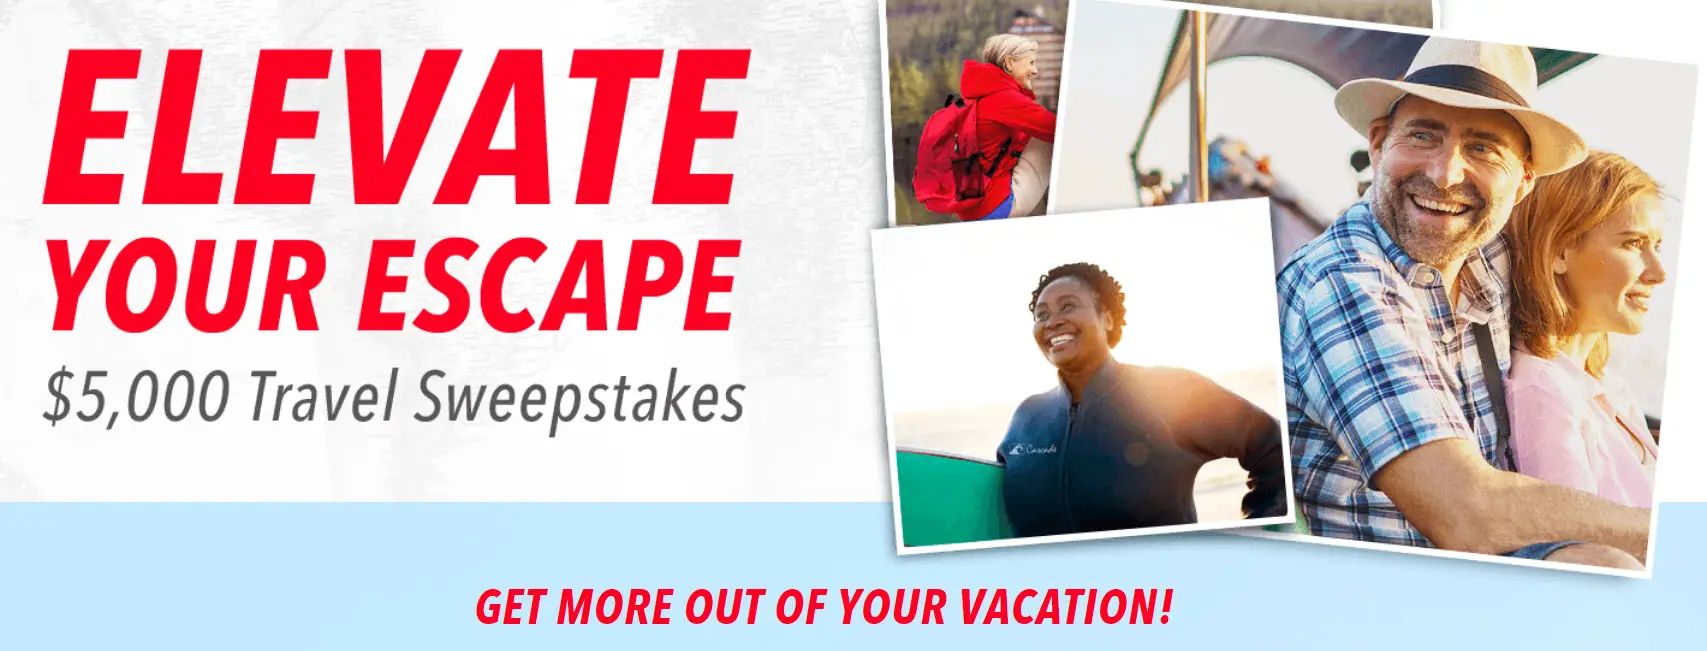 Learn travel tips, discover vacation inspiration, and play the AARP Elevate Your Escape Travel Instant Win Game daily for the chance to win $5,000!